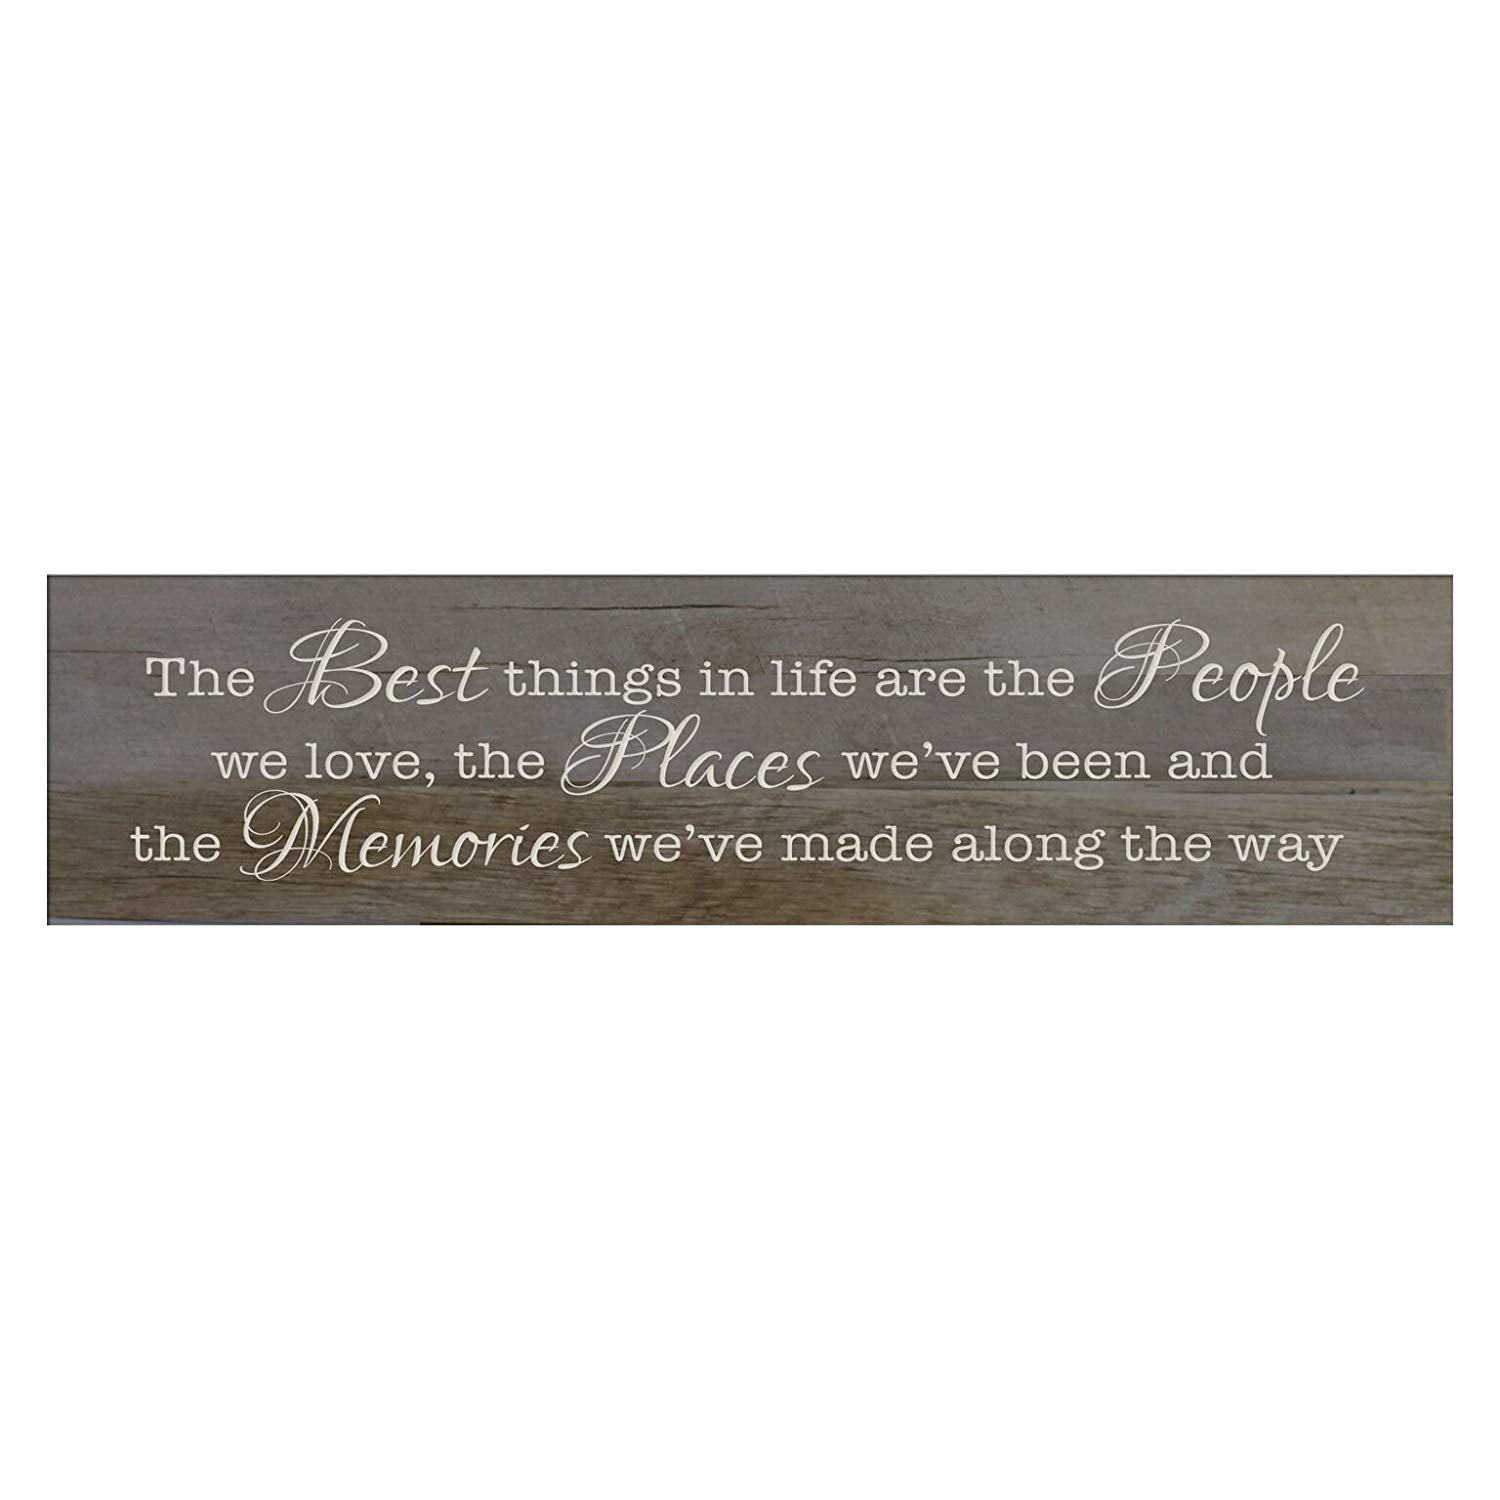 The Best Things In Life are the People Decorative Wall Art Sign